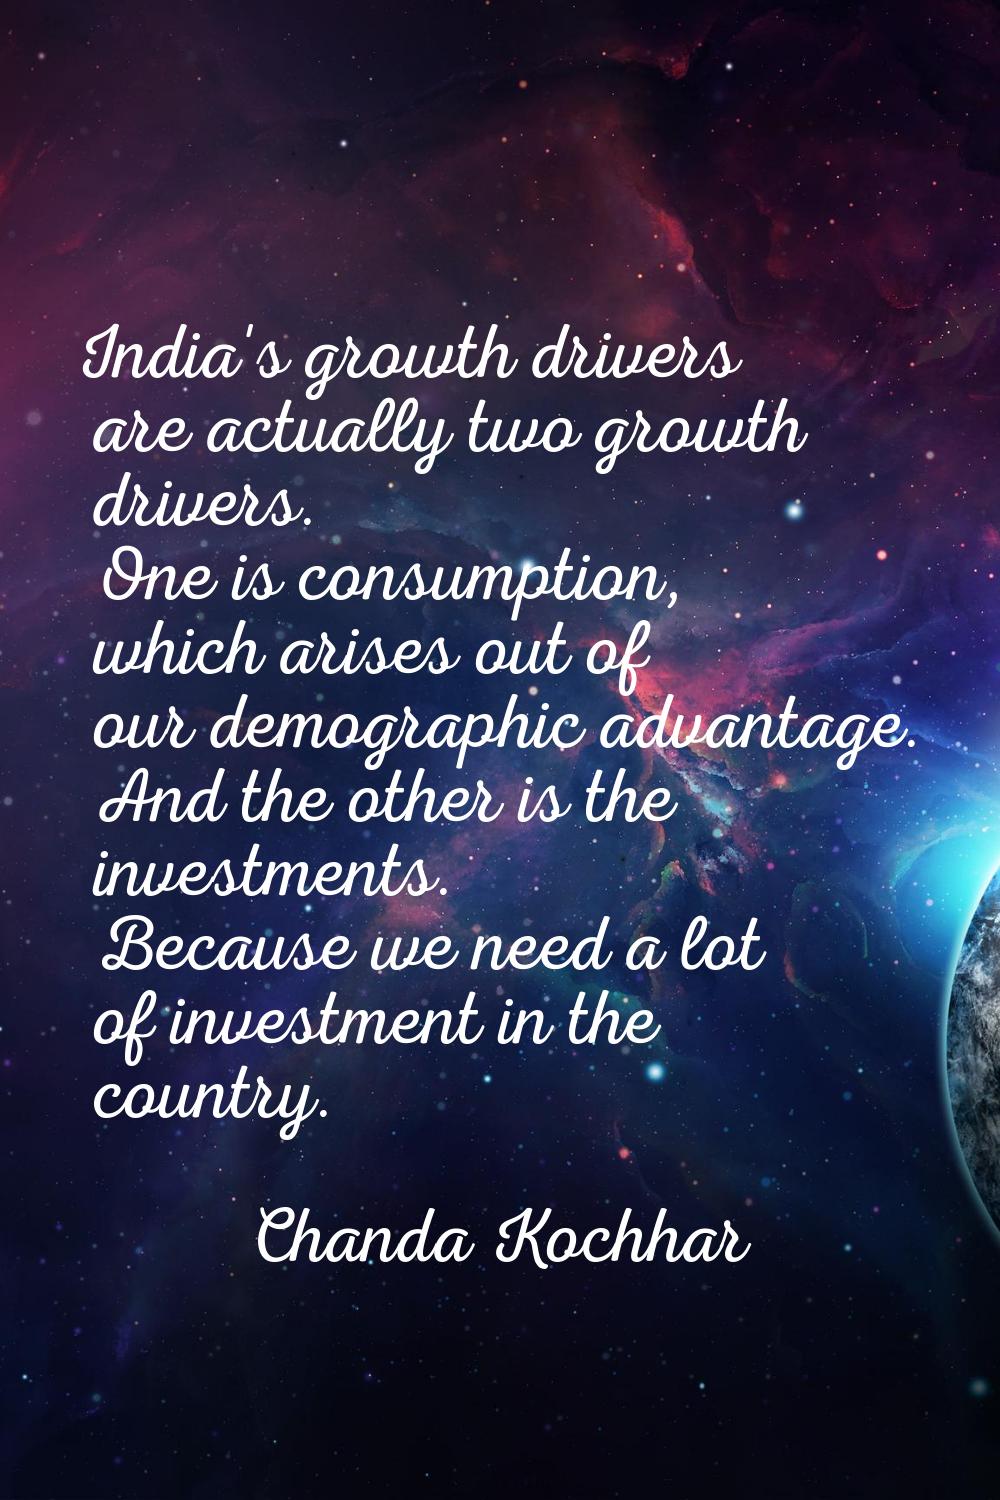 India's growth drivers are actually two growth drivers. One is consumption, which arises out of our